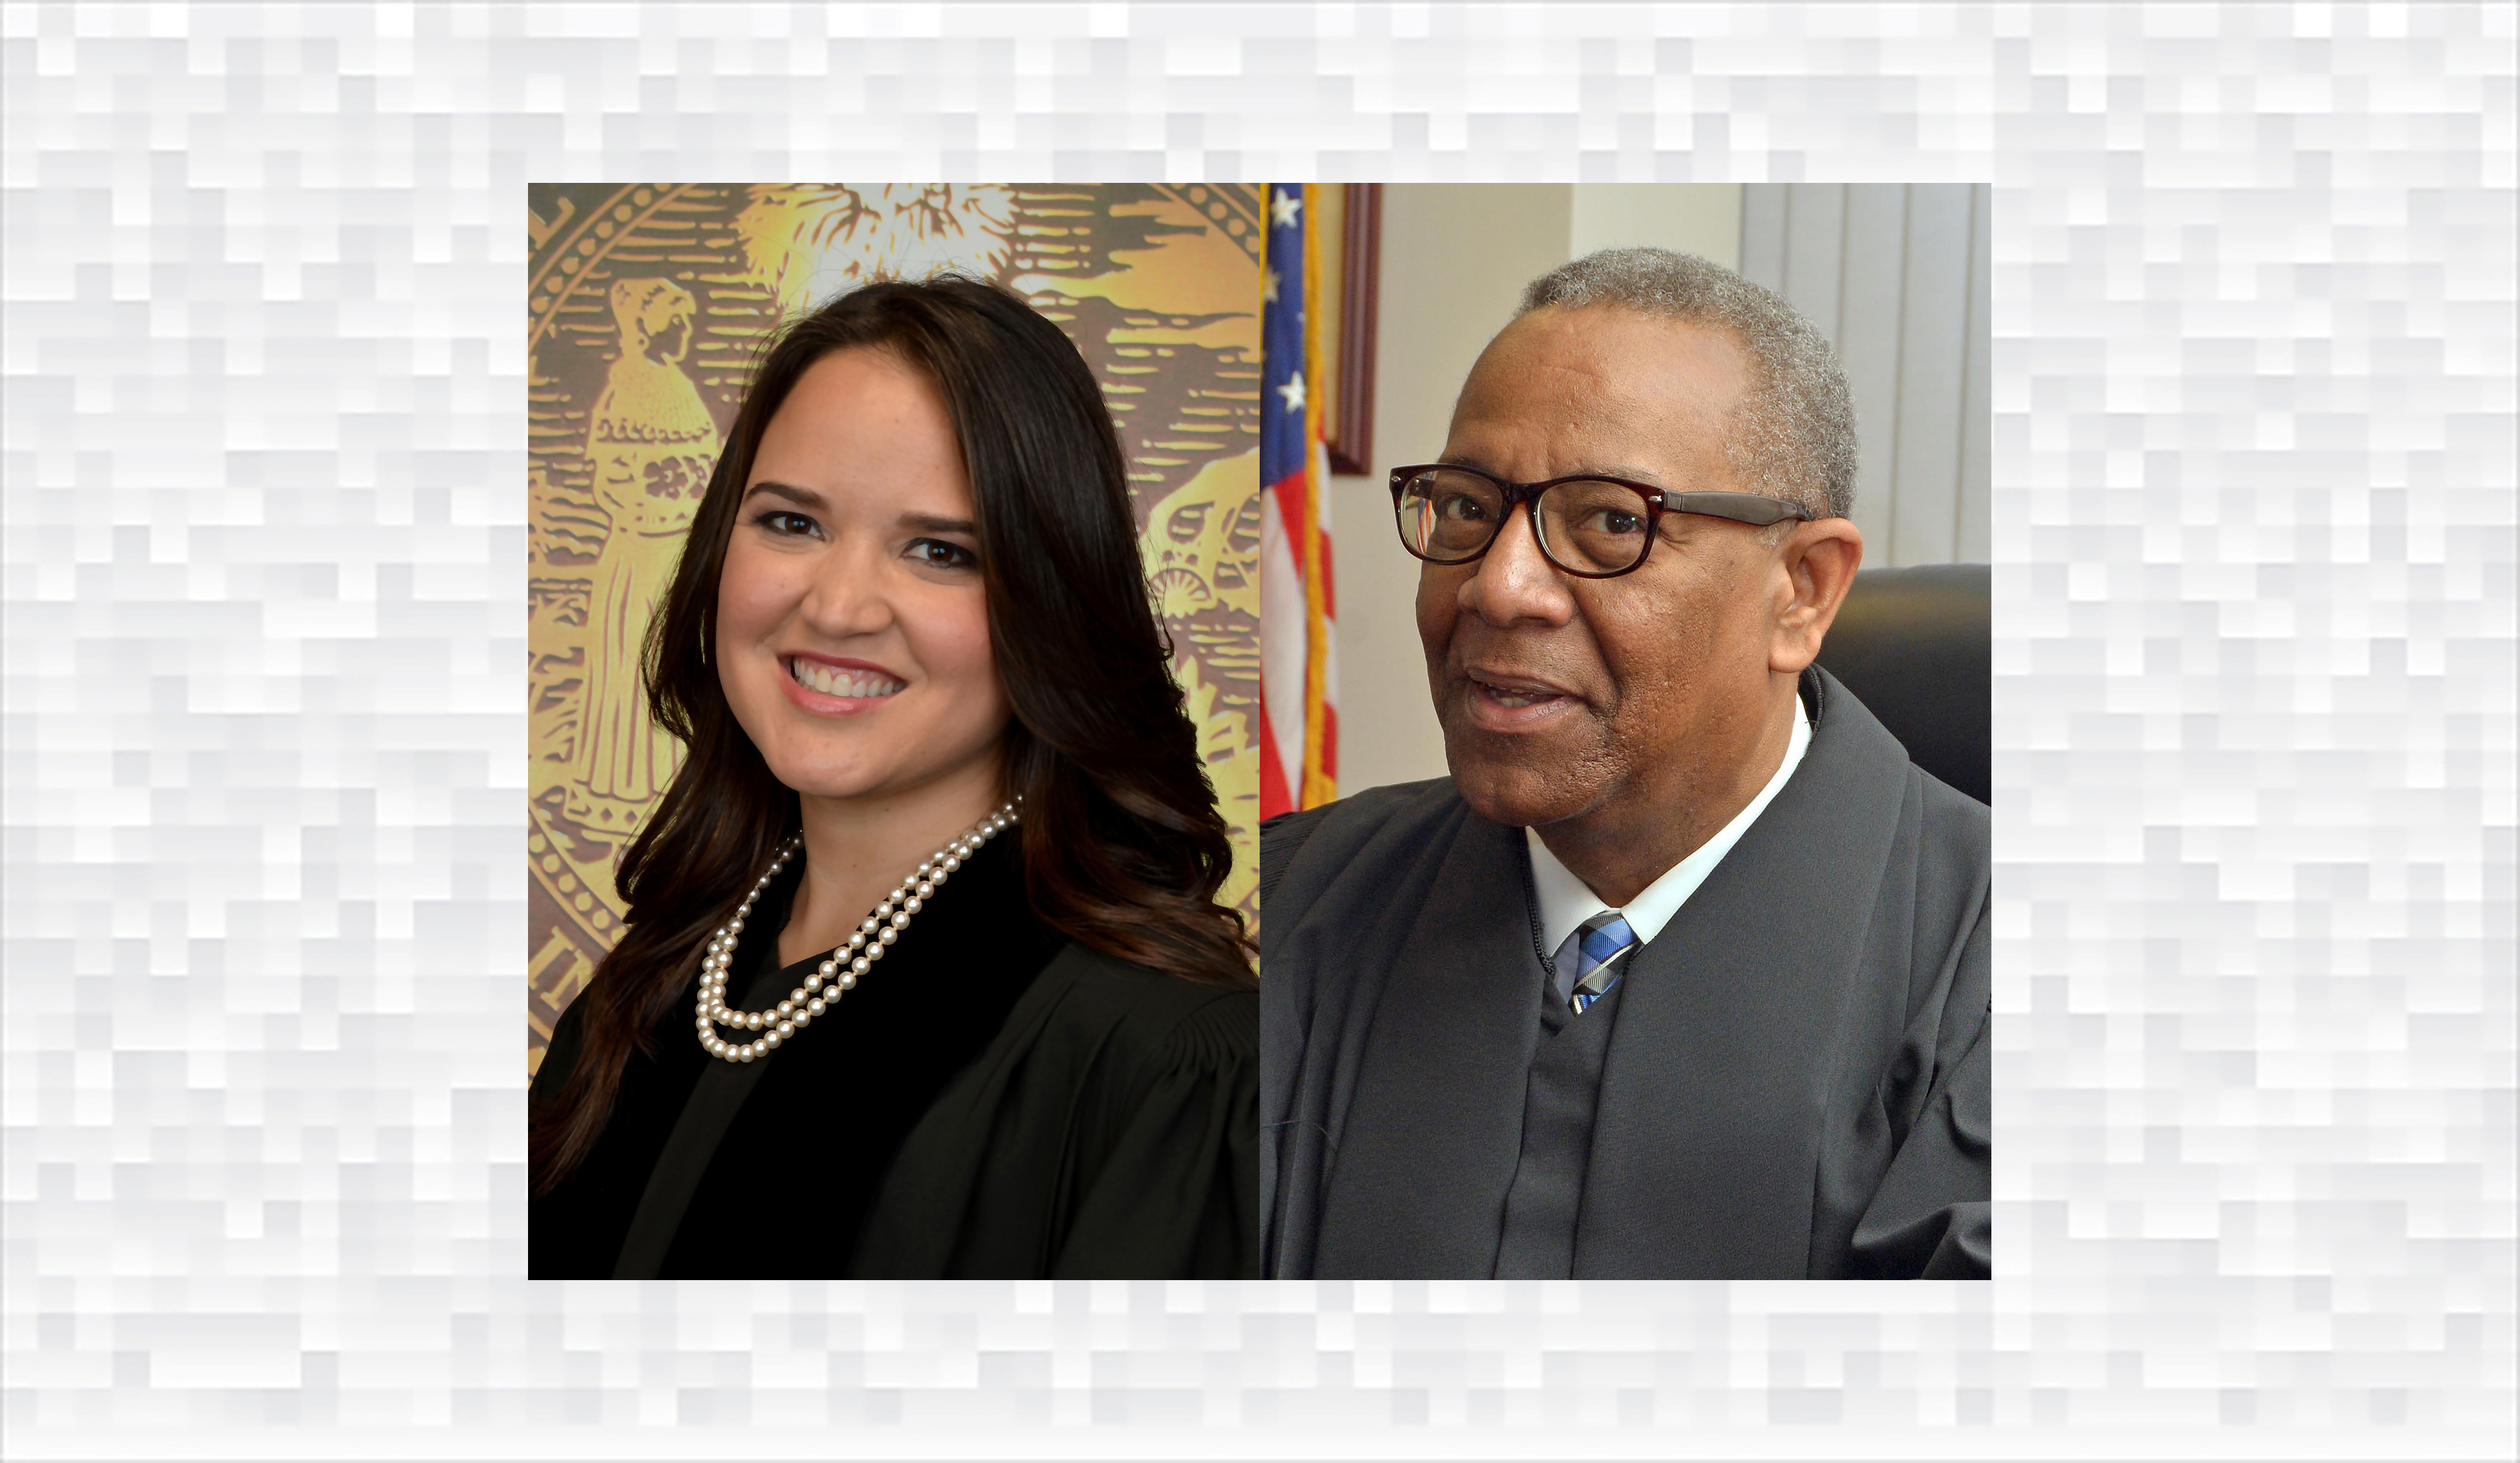 The View From the Room: 2 Judges Weigh In on Judicial Vacancies and the Value of Experience